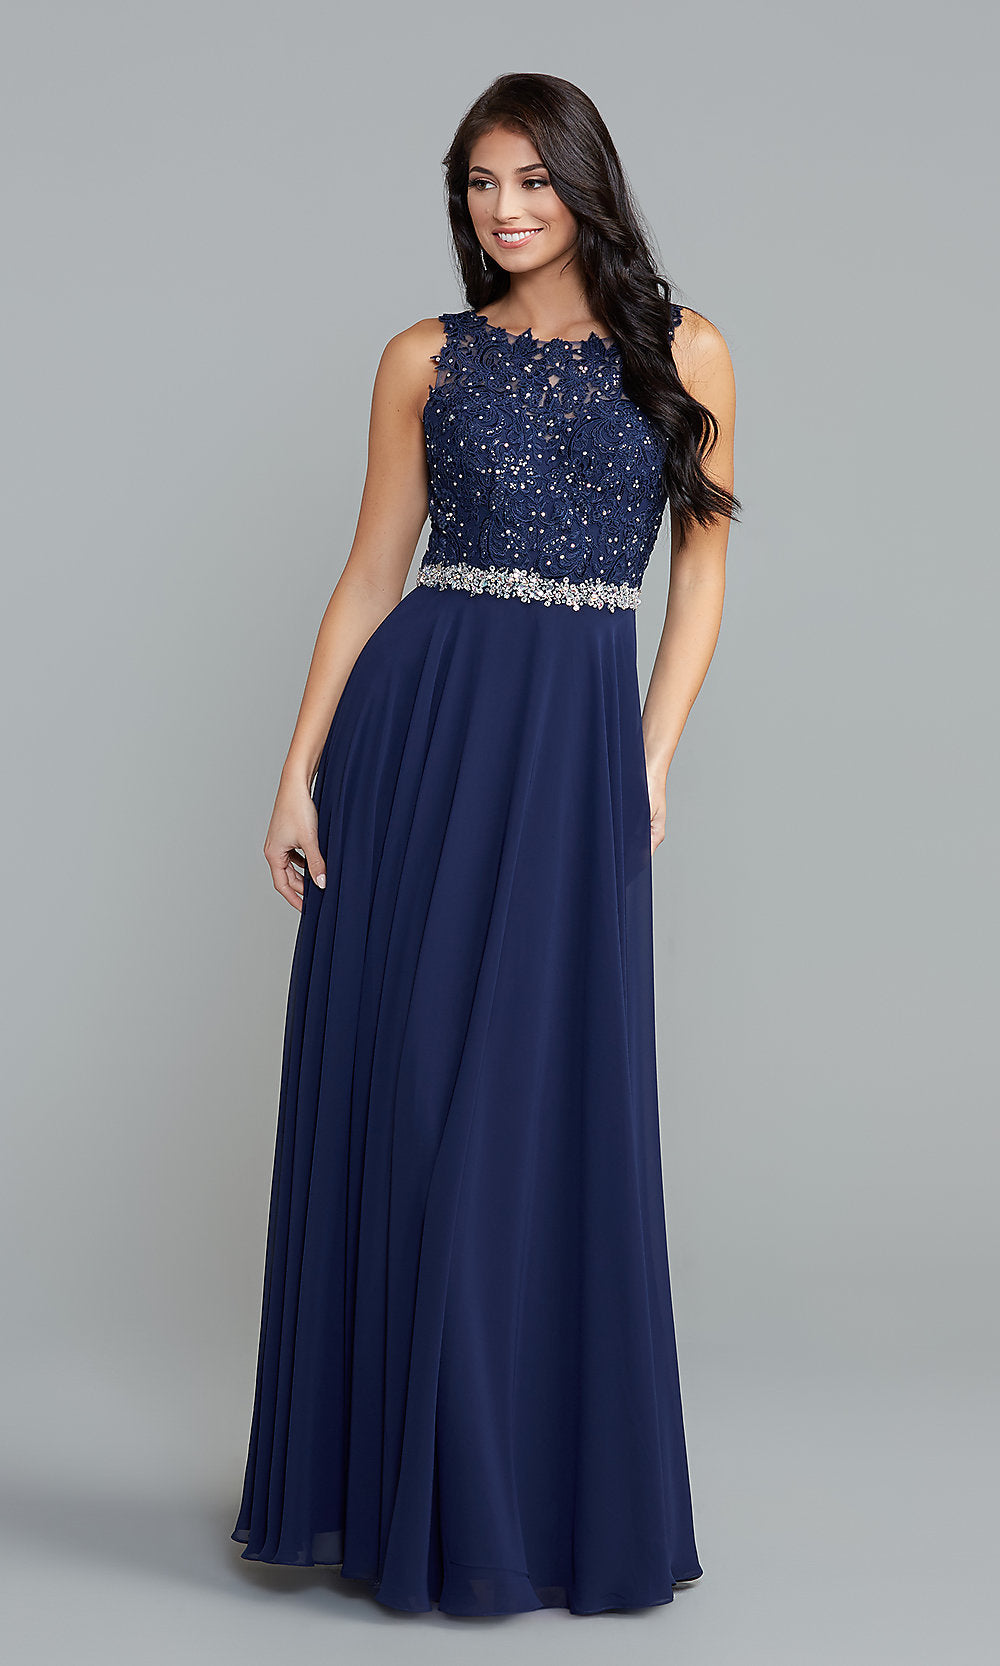  Beaded-Bodice Long Formal Dress with Cut-Out Back